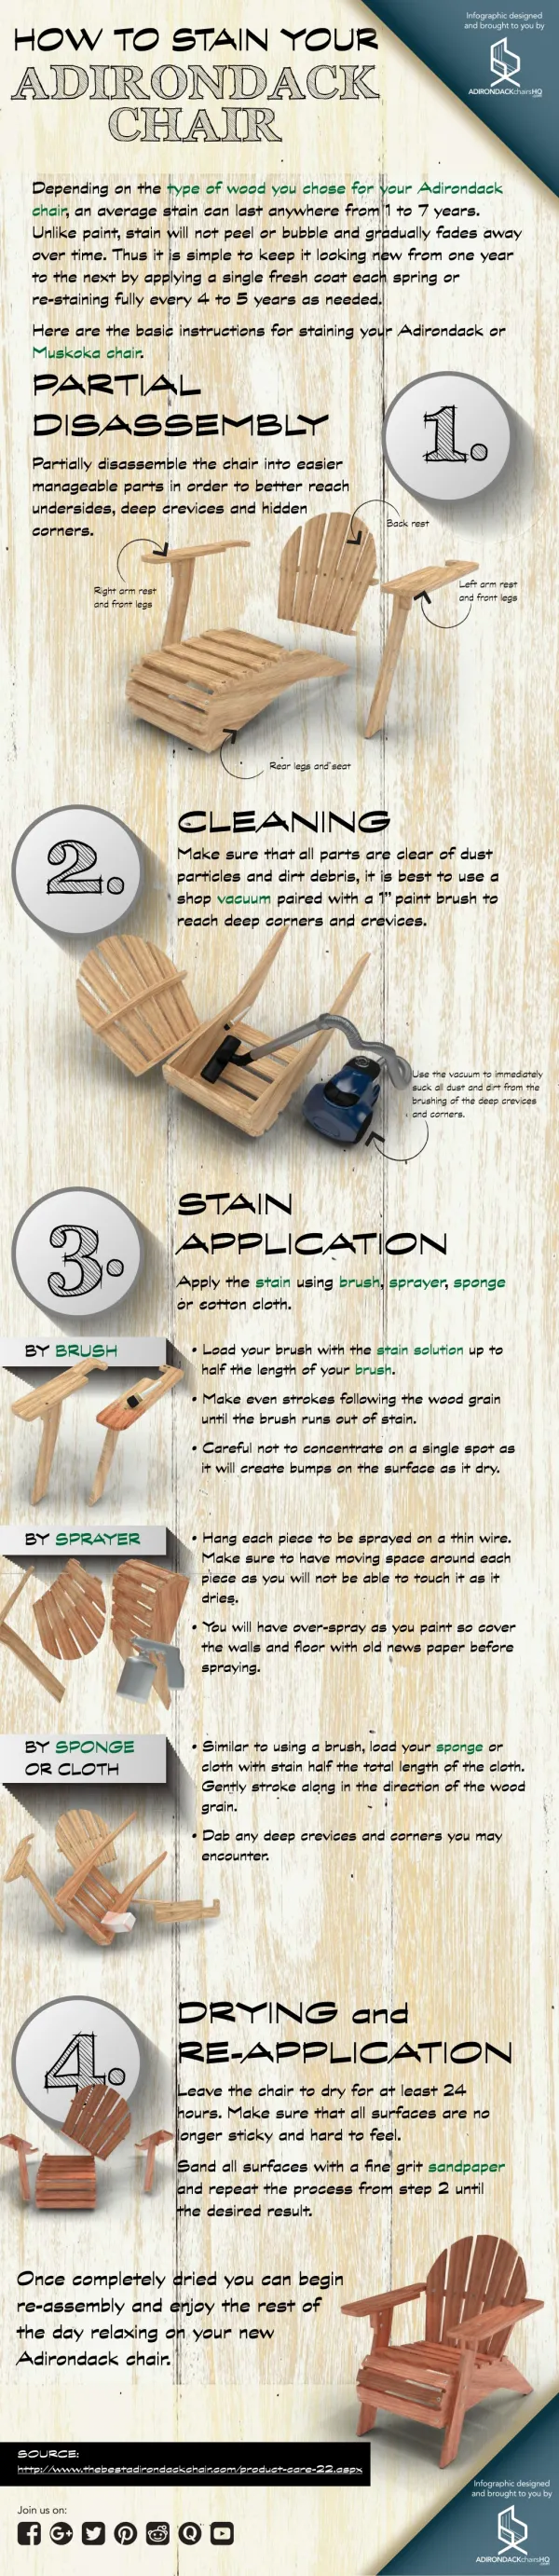 How to stain your adirondack chair